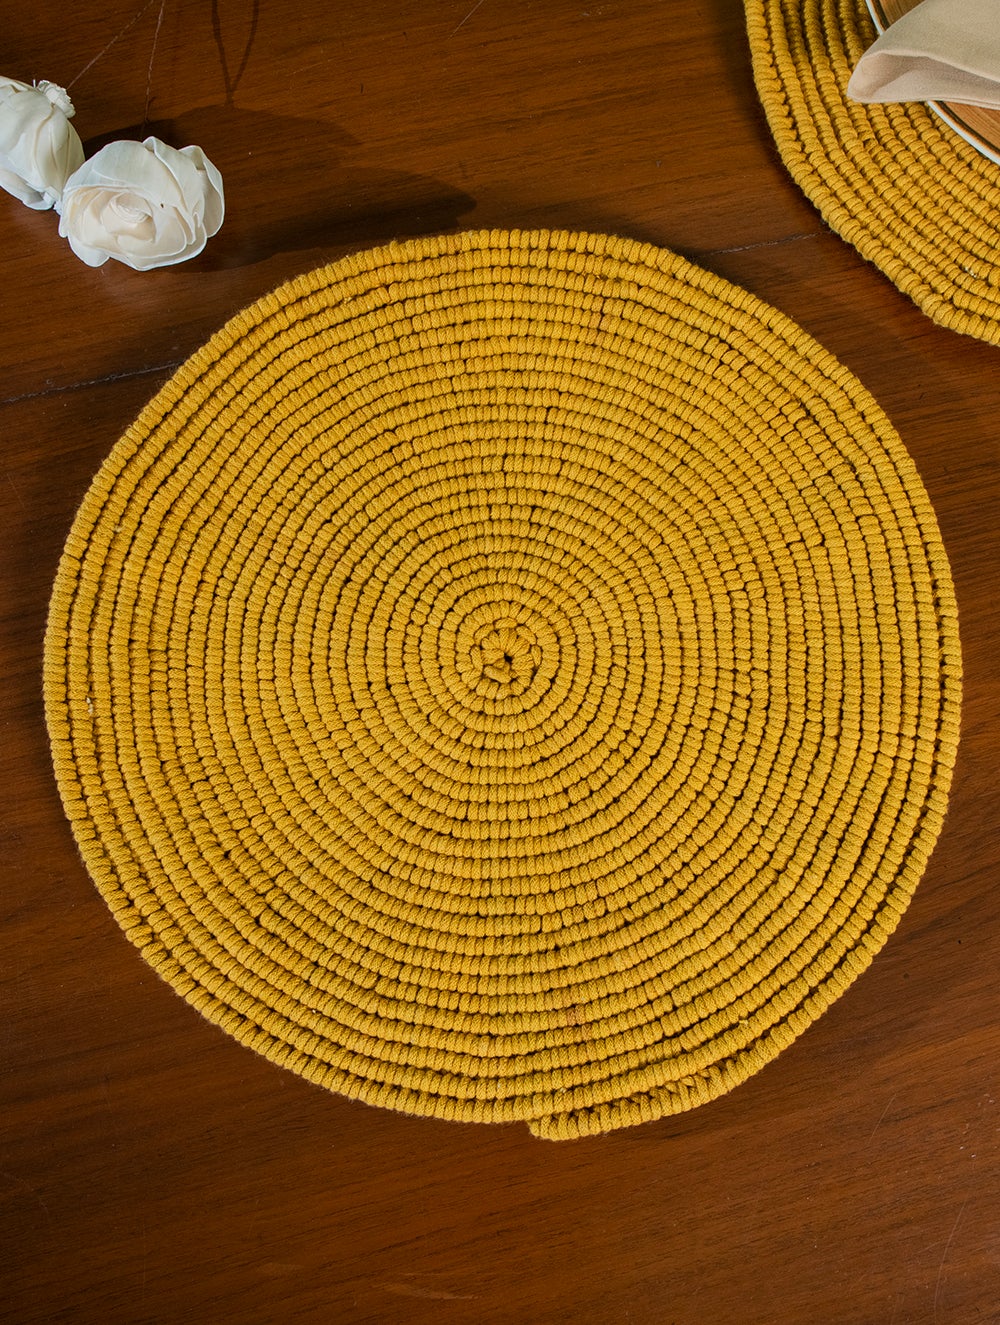 Load image into Gallery viewer, Handknotted Macramé Large Round Mats (Set of 2) - Mustard